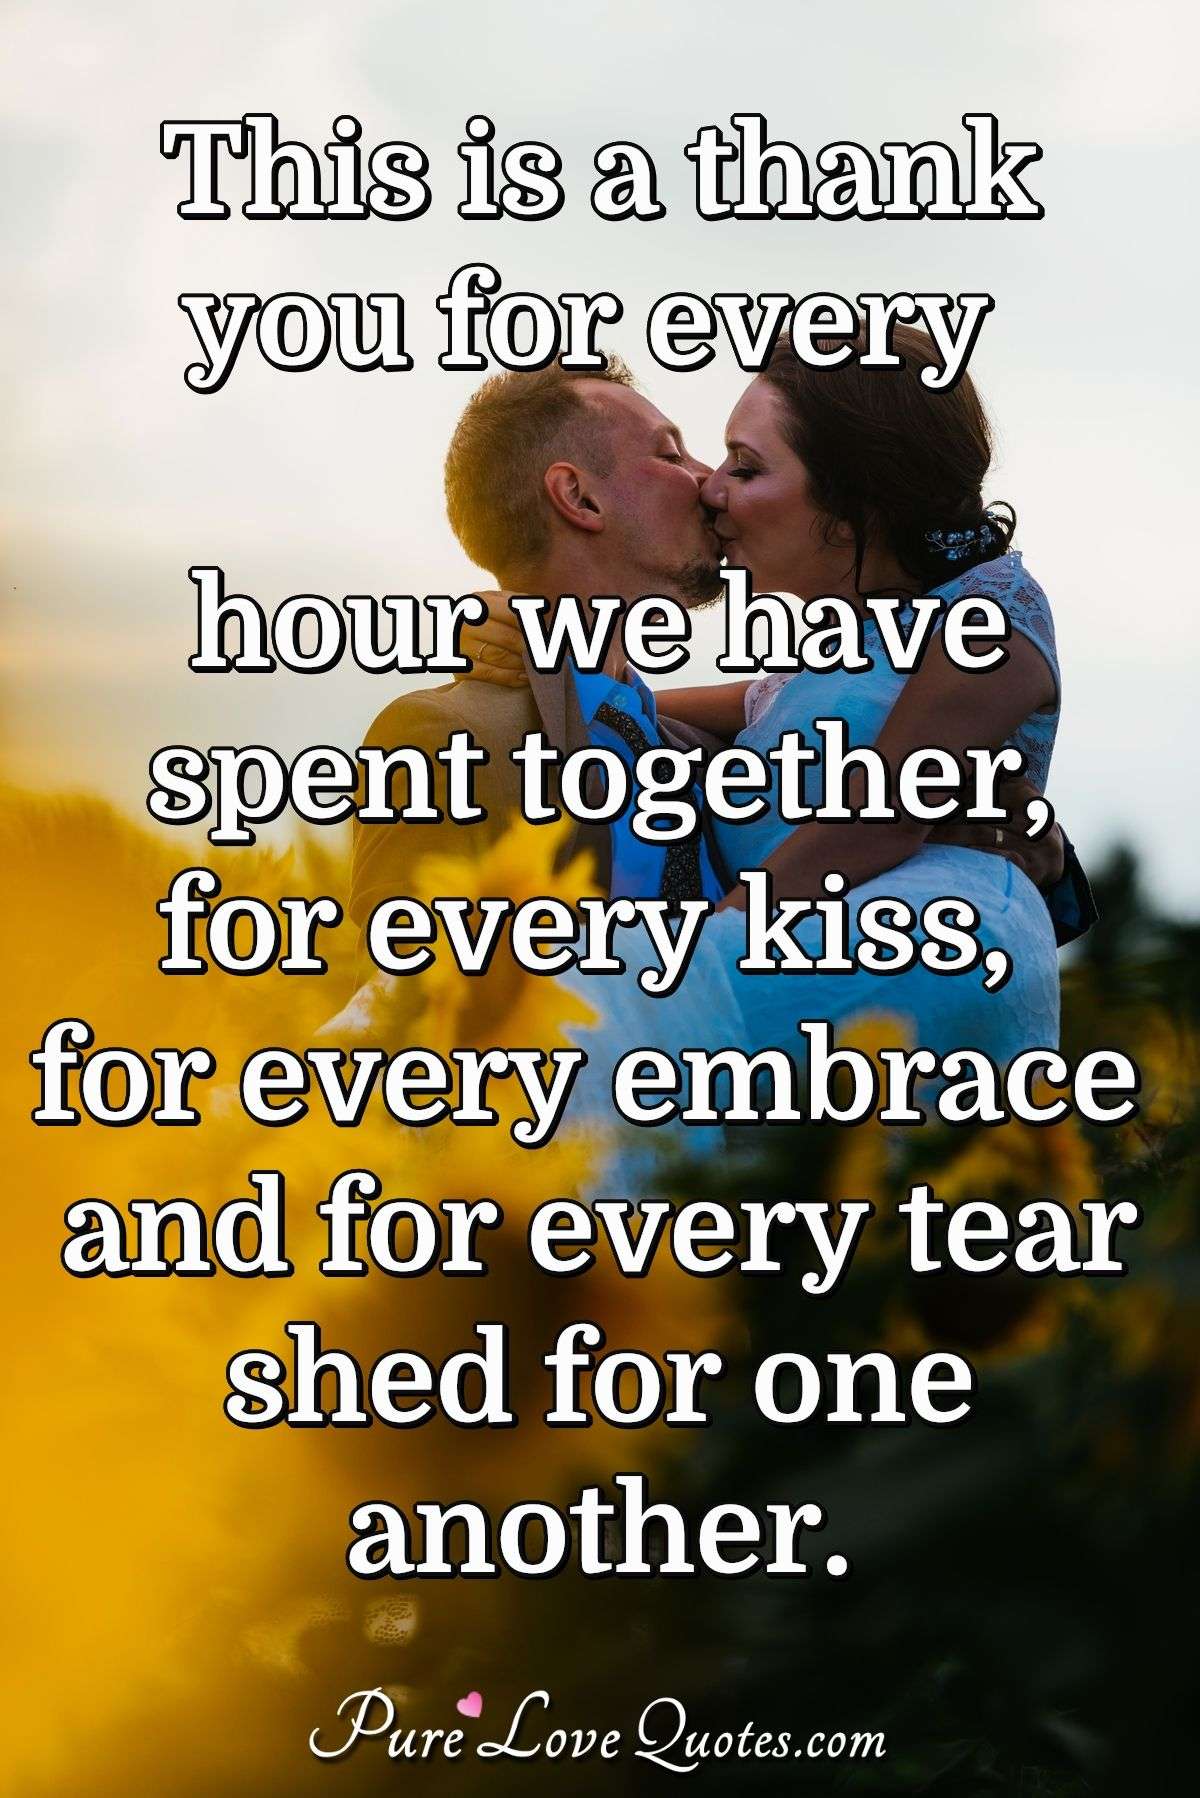 This is a thank you for every hour we have spent together, for every kiss, for every embrace and for every tear shed for one another. - PureLoveQuotes.com